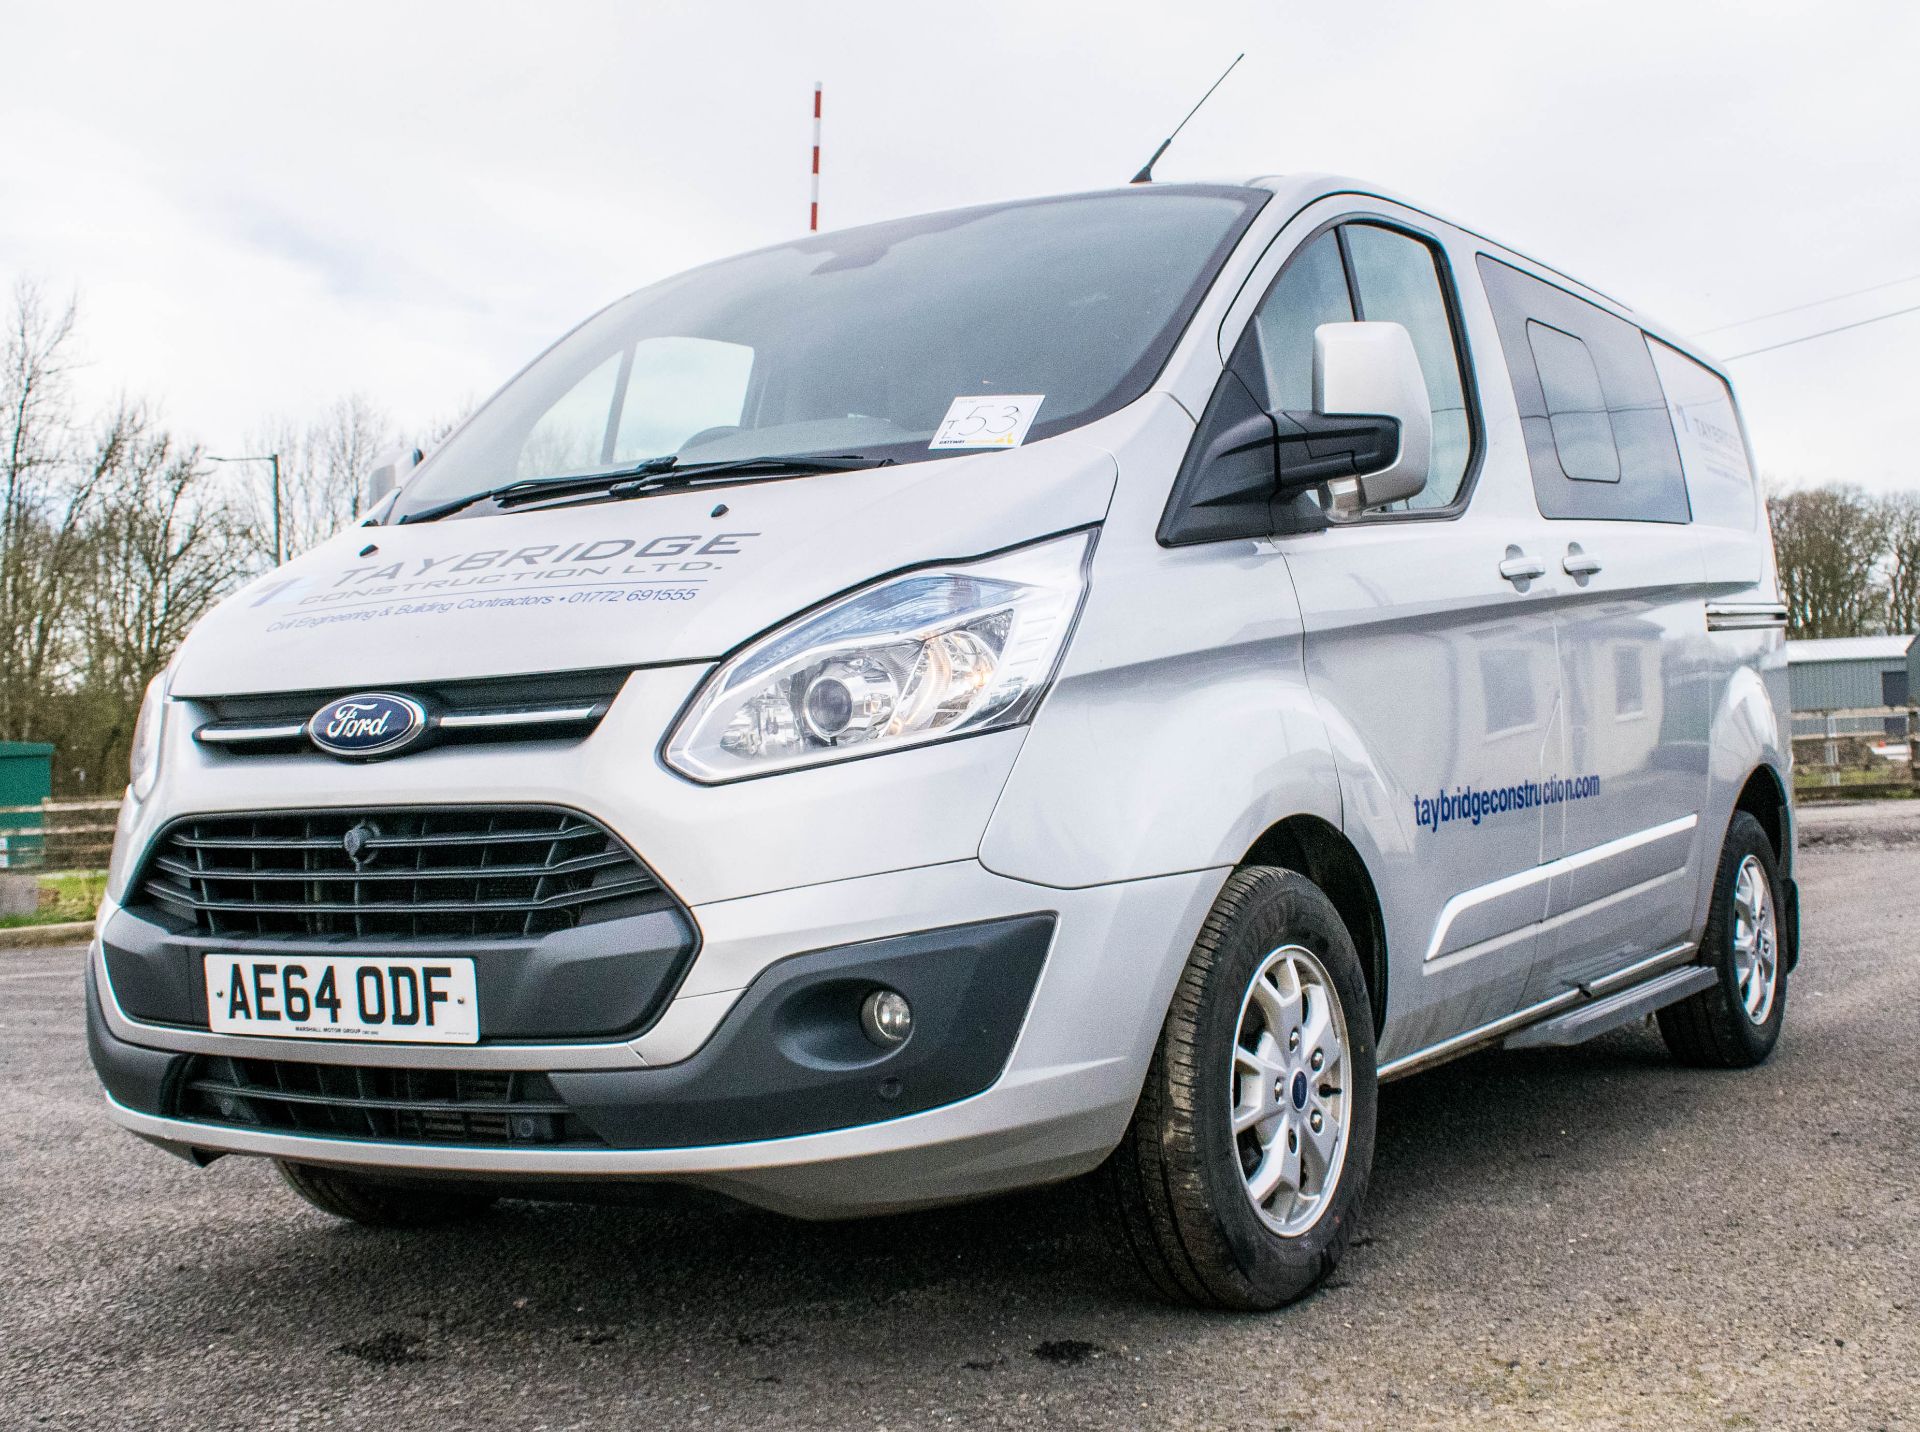 Ford Transit Custom Limited 290 125 PS crew cab panel van Registration Number: AE64 ODF Date of